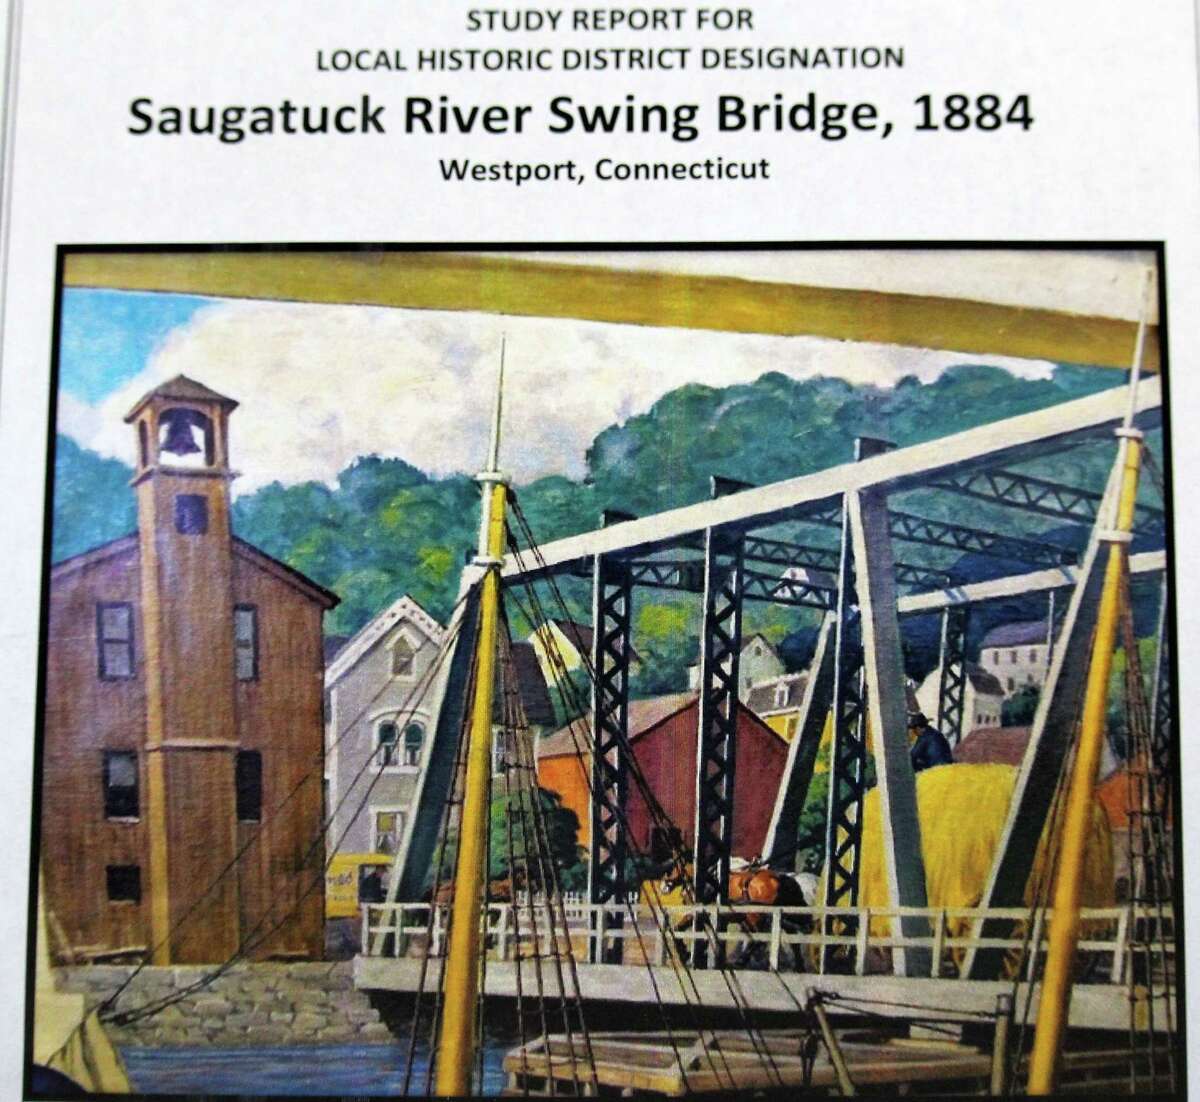 The cover page of the study report for local historic designation of the Saugatuck River swing bridge prepared by the Saugatuck Swing Bridge Study Subcommittee for consideration by other town bodies.